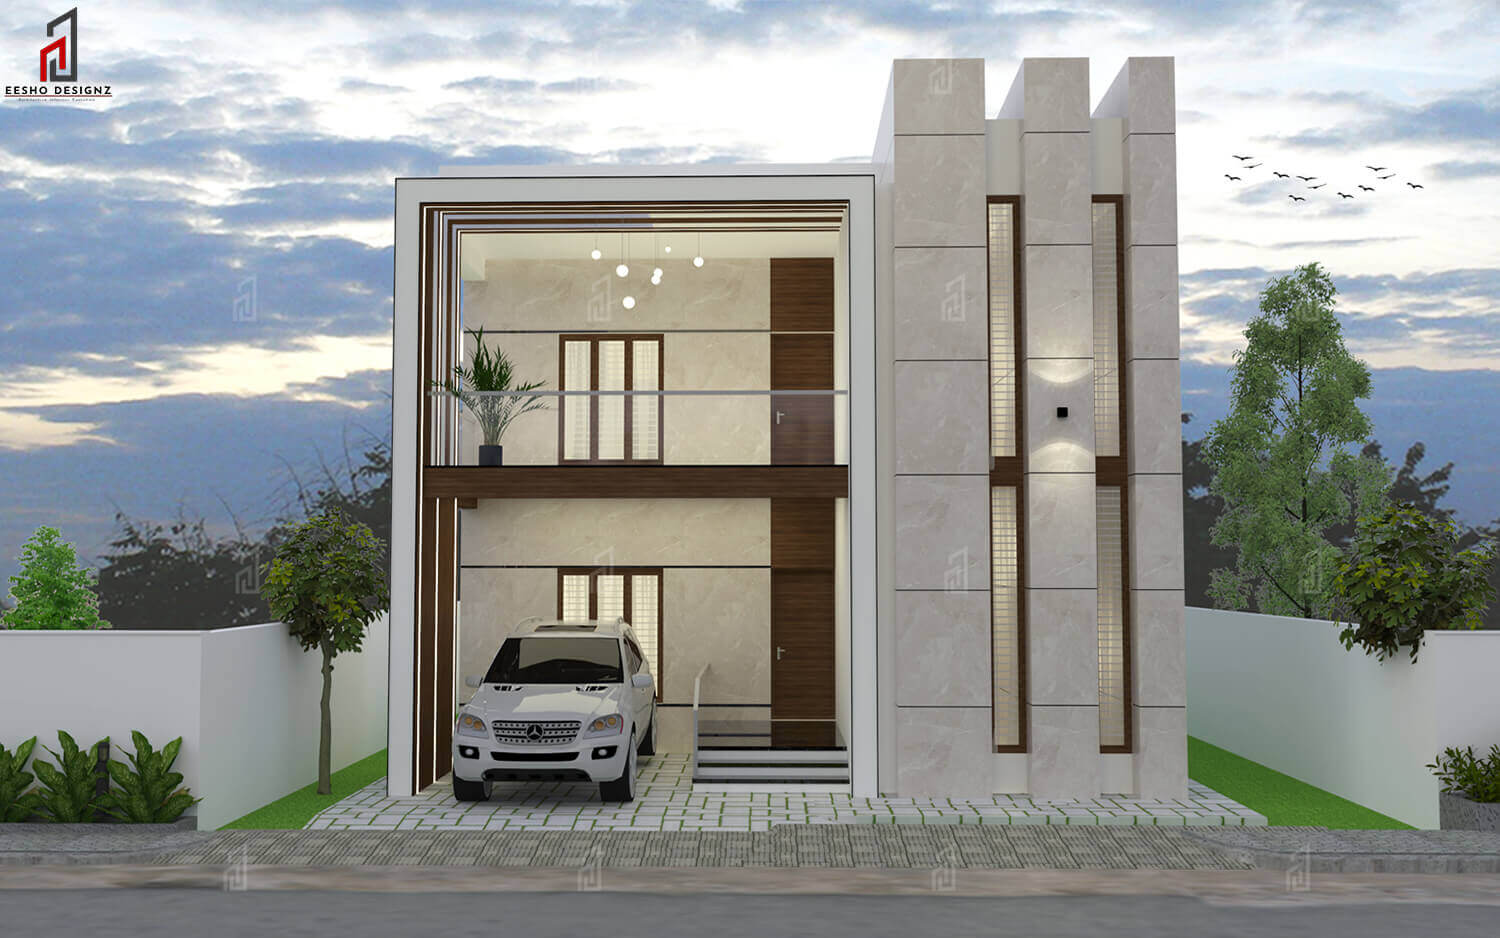 Proposed Residence @ Nagercoil